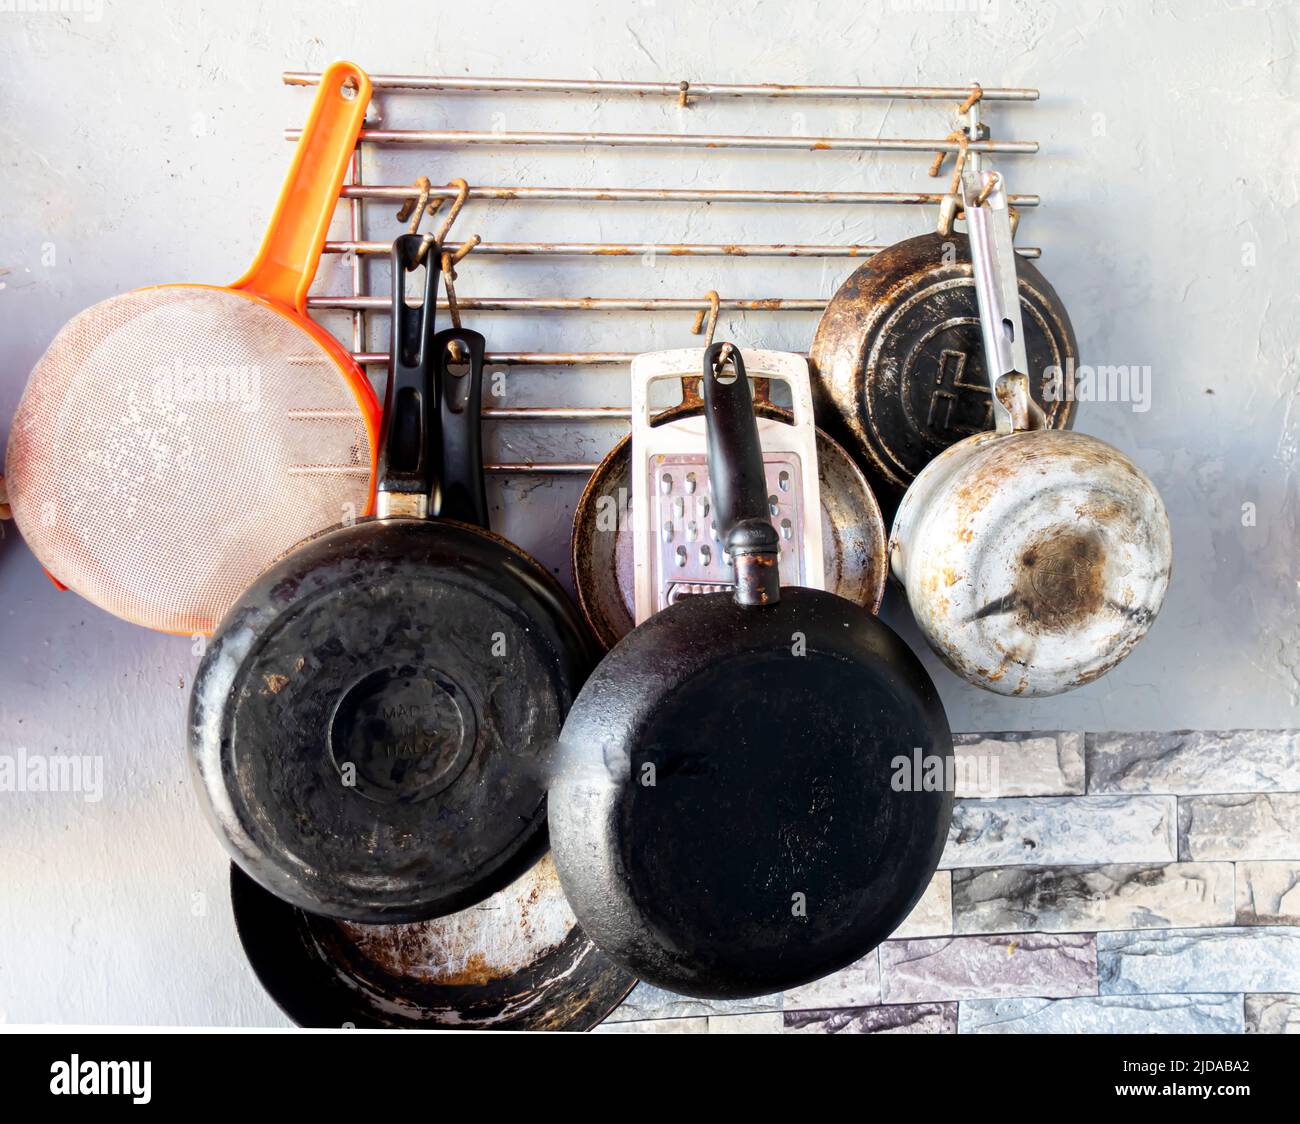 Pans hanging kitchens hi-res stock photography and images - Alamy